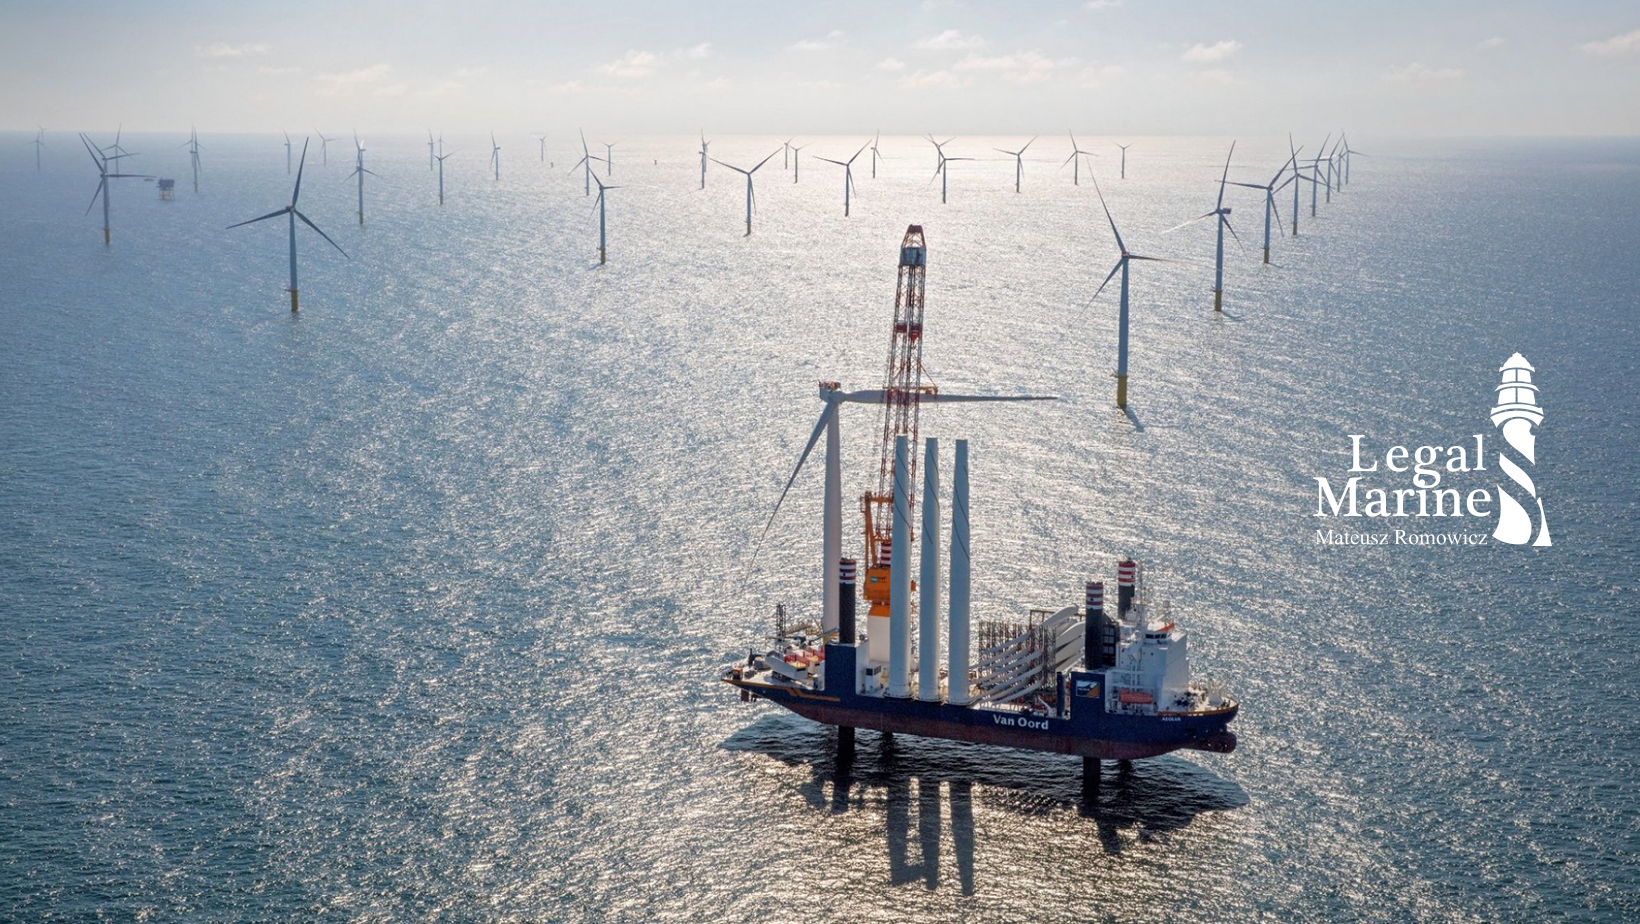 Offshore wind farms: when poised to take off in Poland? – the legal aspect - MarinePoland.com